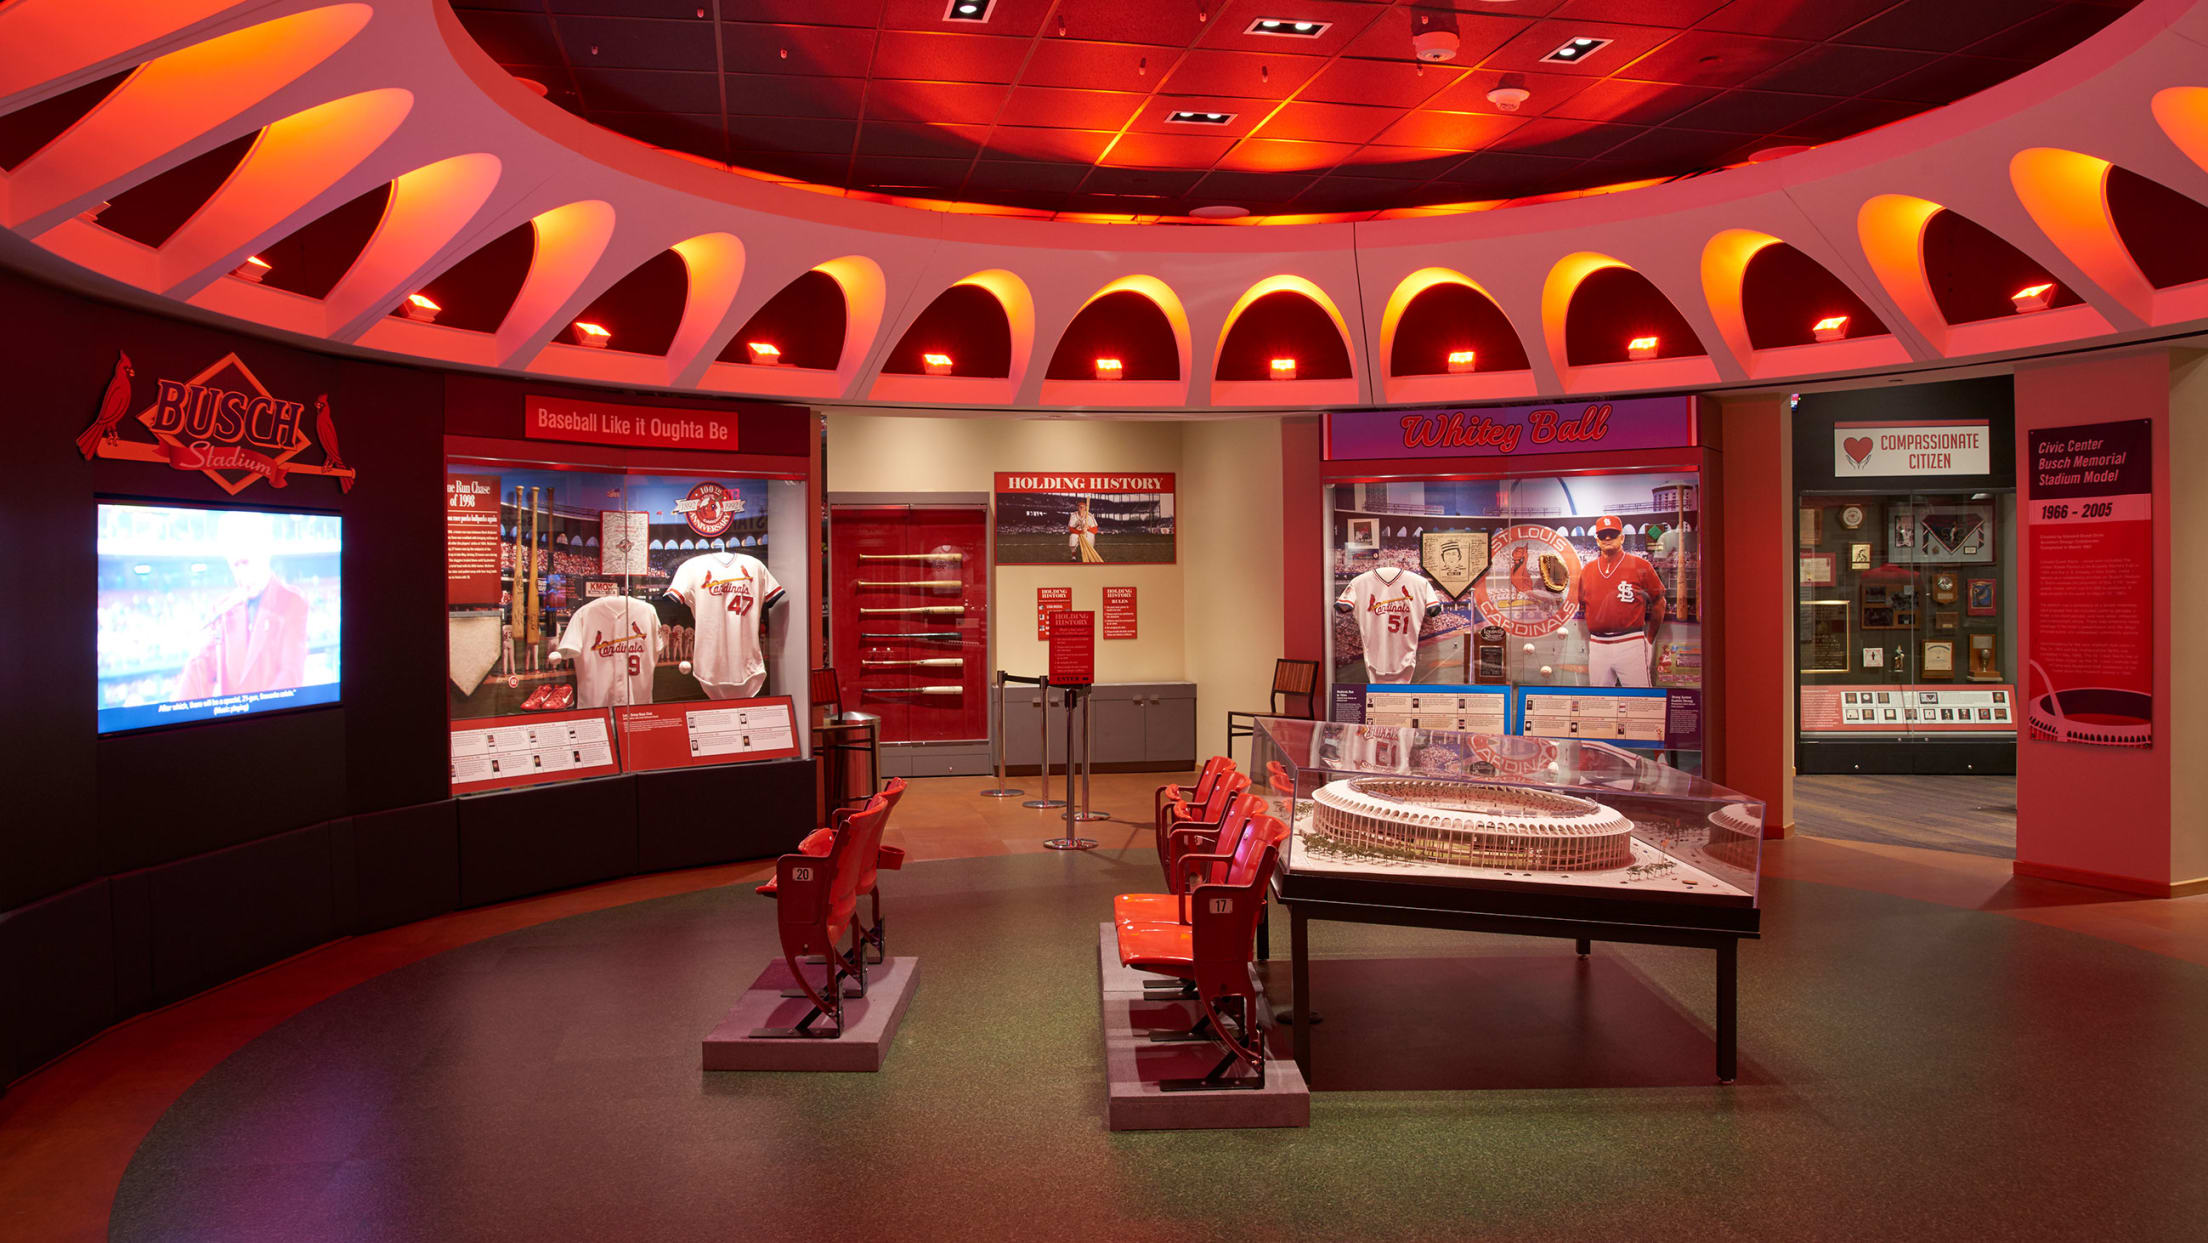 BLOG: A look inside the St. Louis Cardinals Hall of Fame Museum